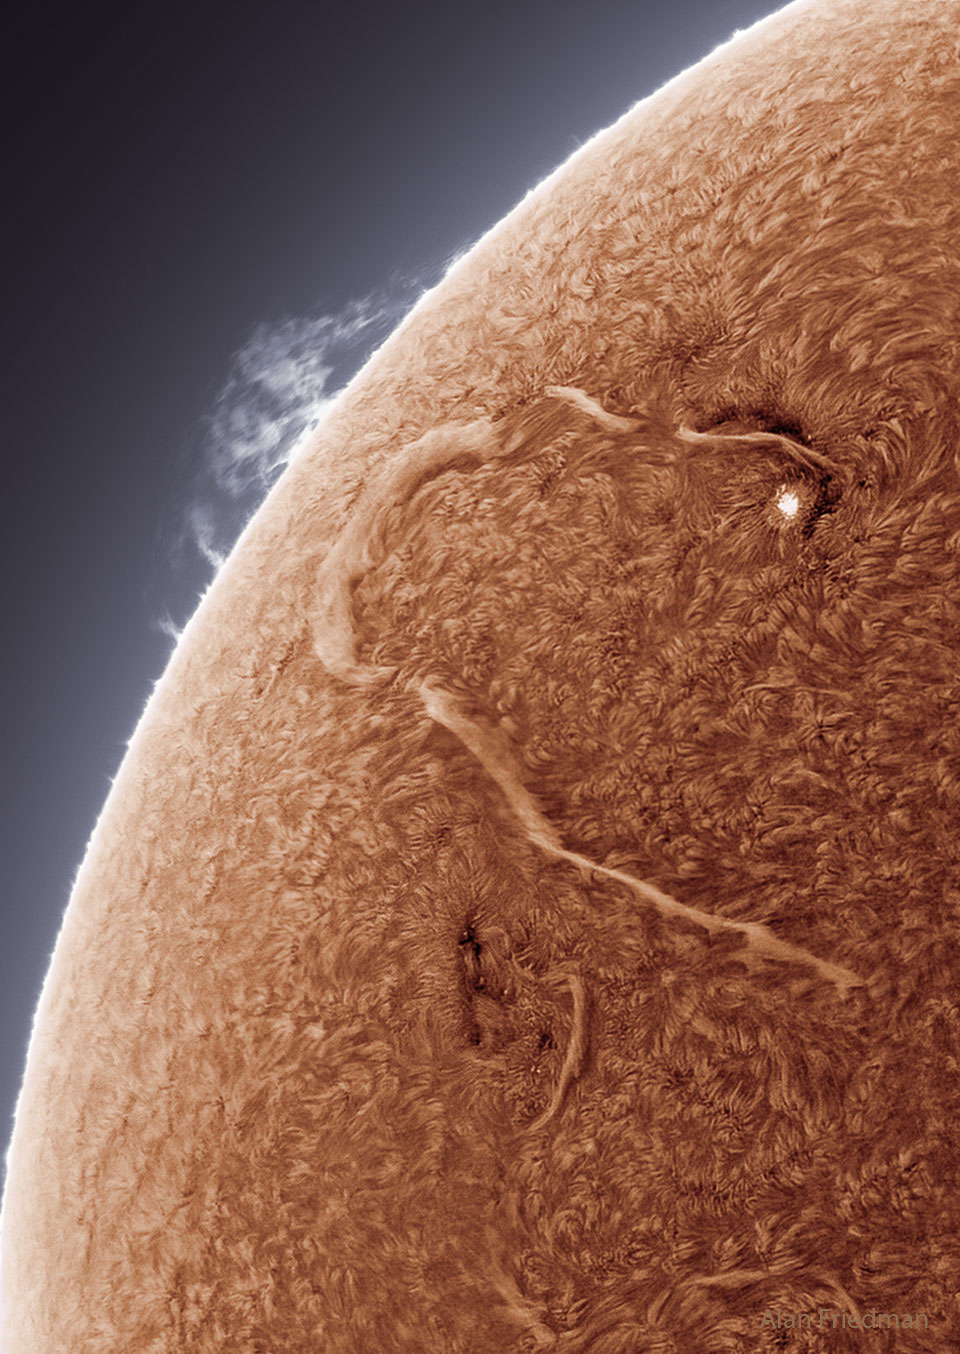 A Long Snaking Filament on the Sun